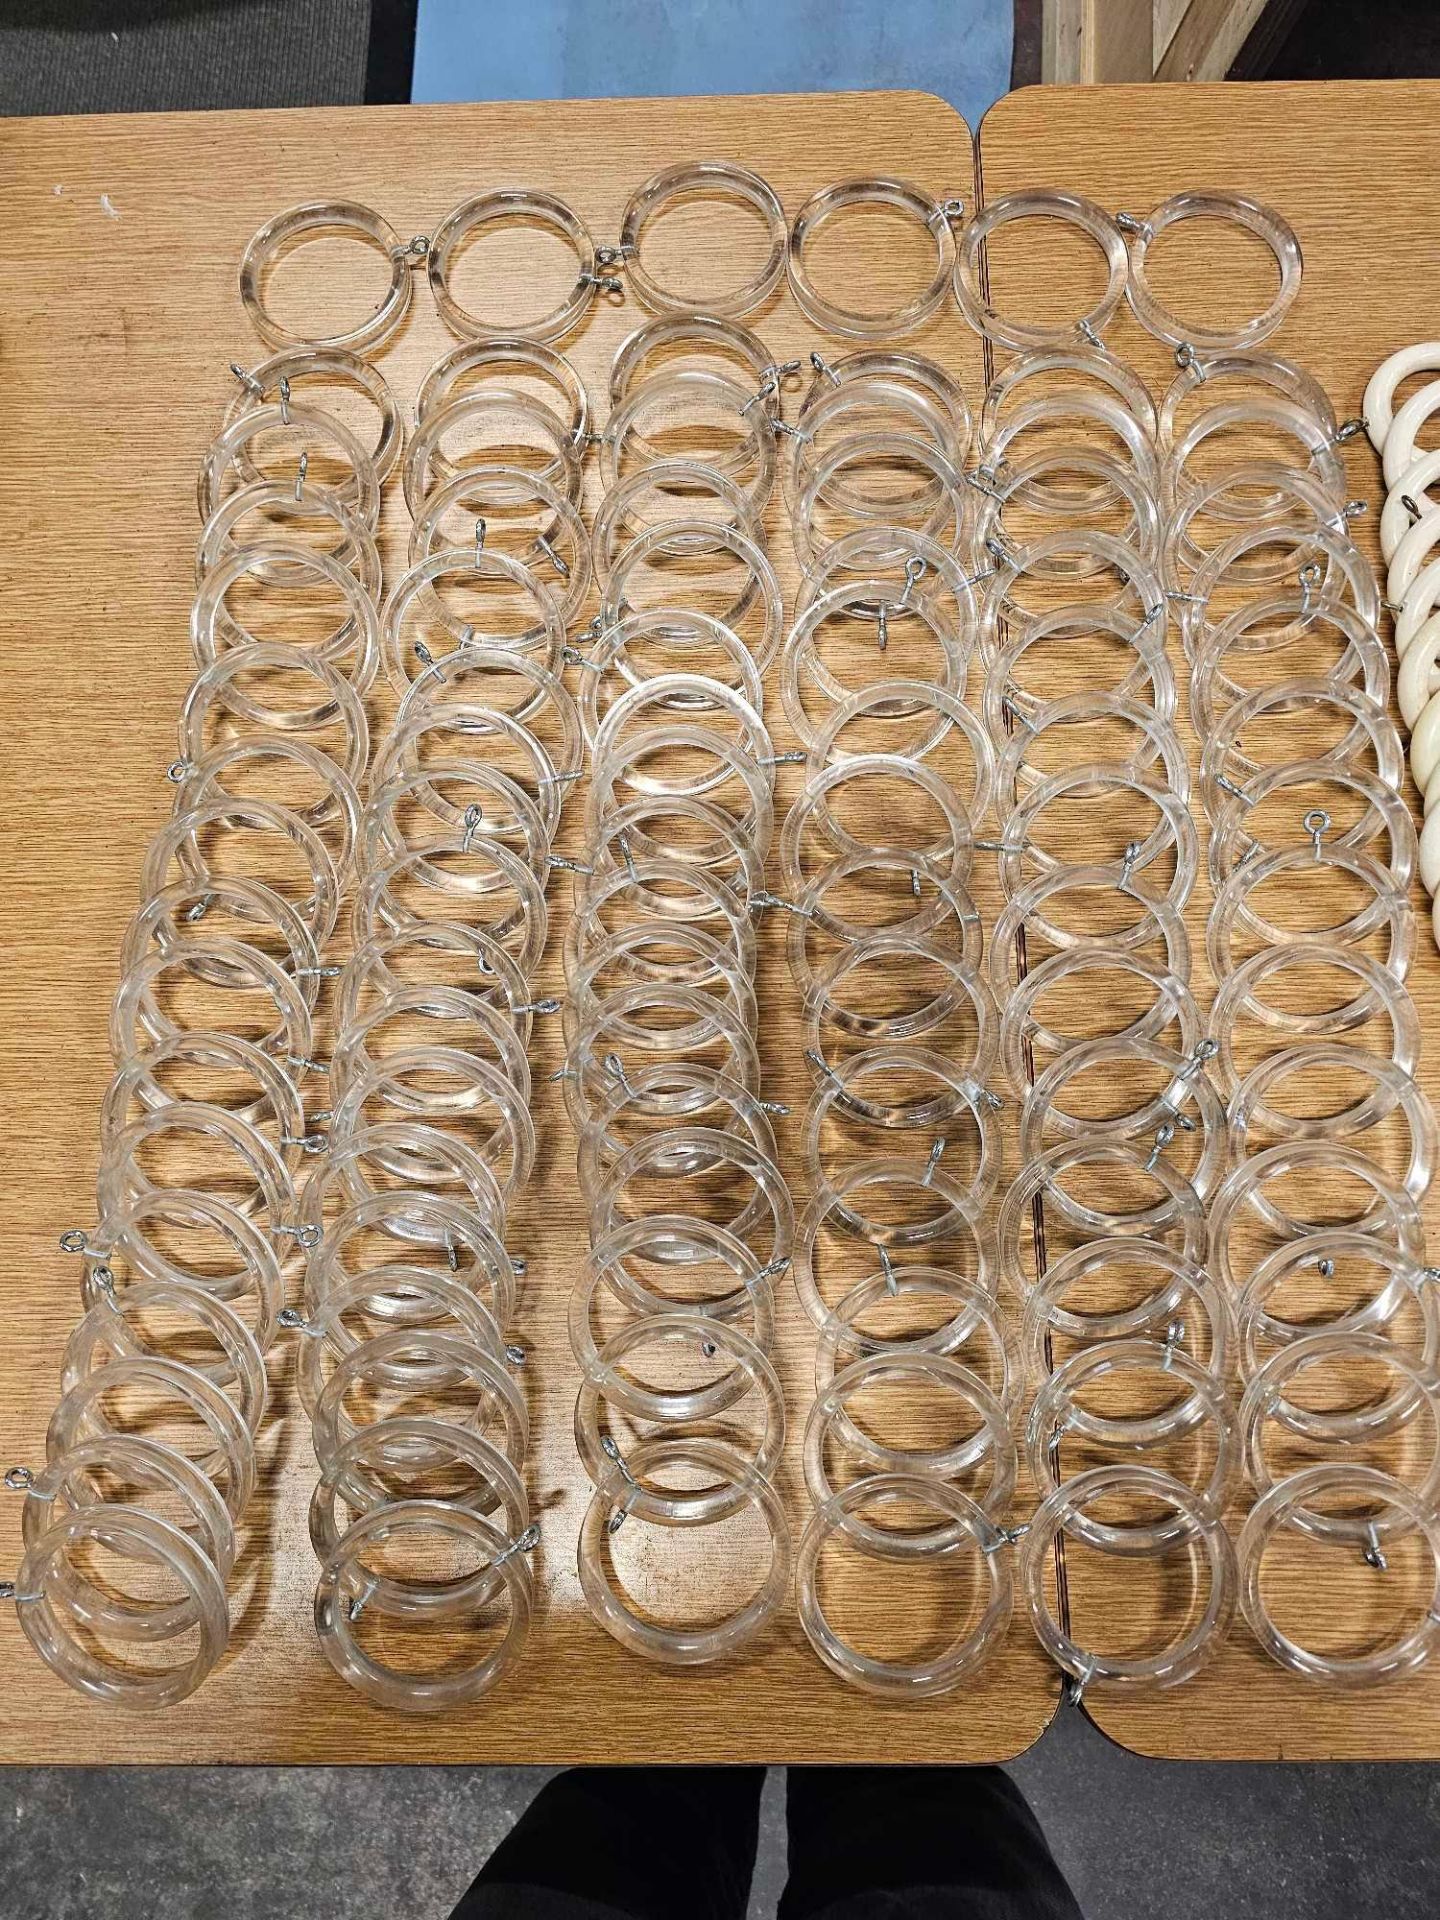 Assortment Of Curtain Rings Plastic x 97 Bronze x 16 Gold x 12 Wood White x 20 Chrome x 10 (Ref - Image 3 of 3